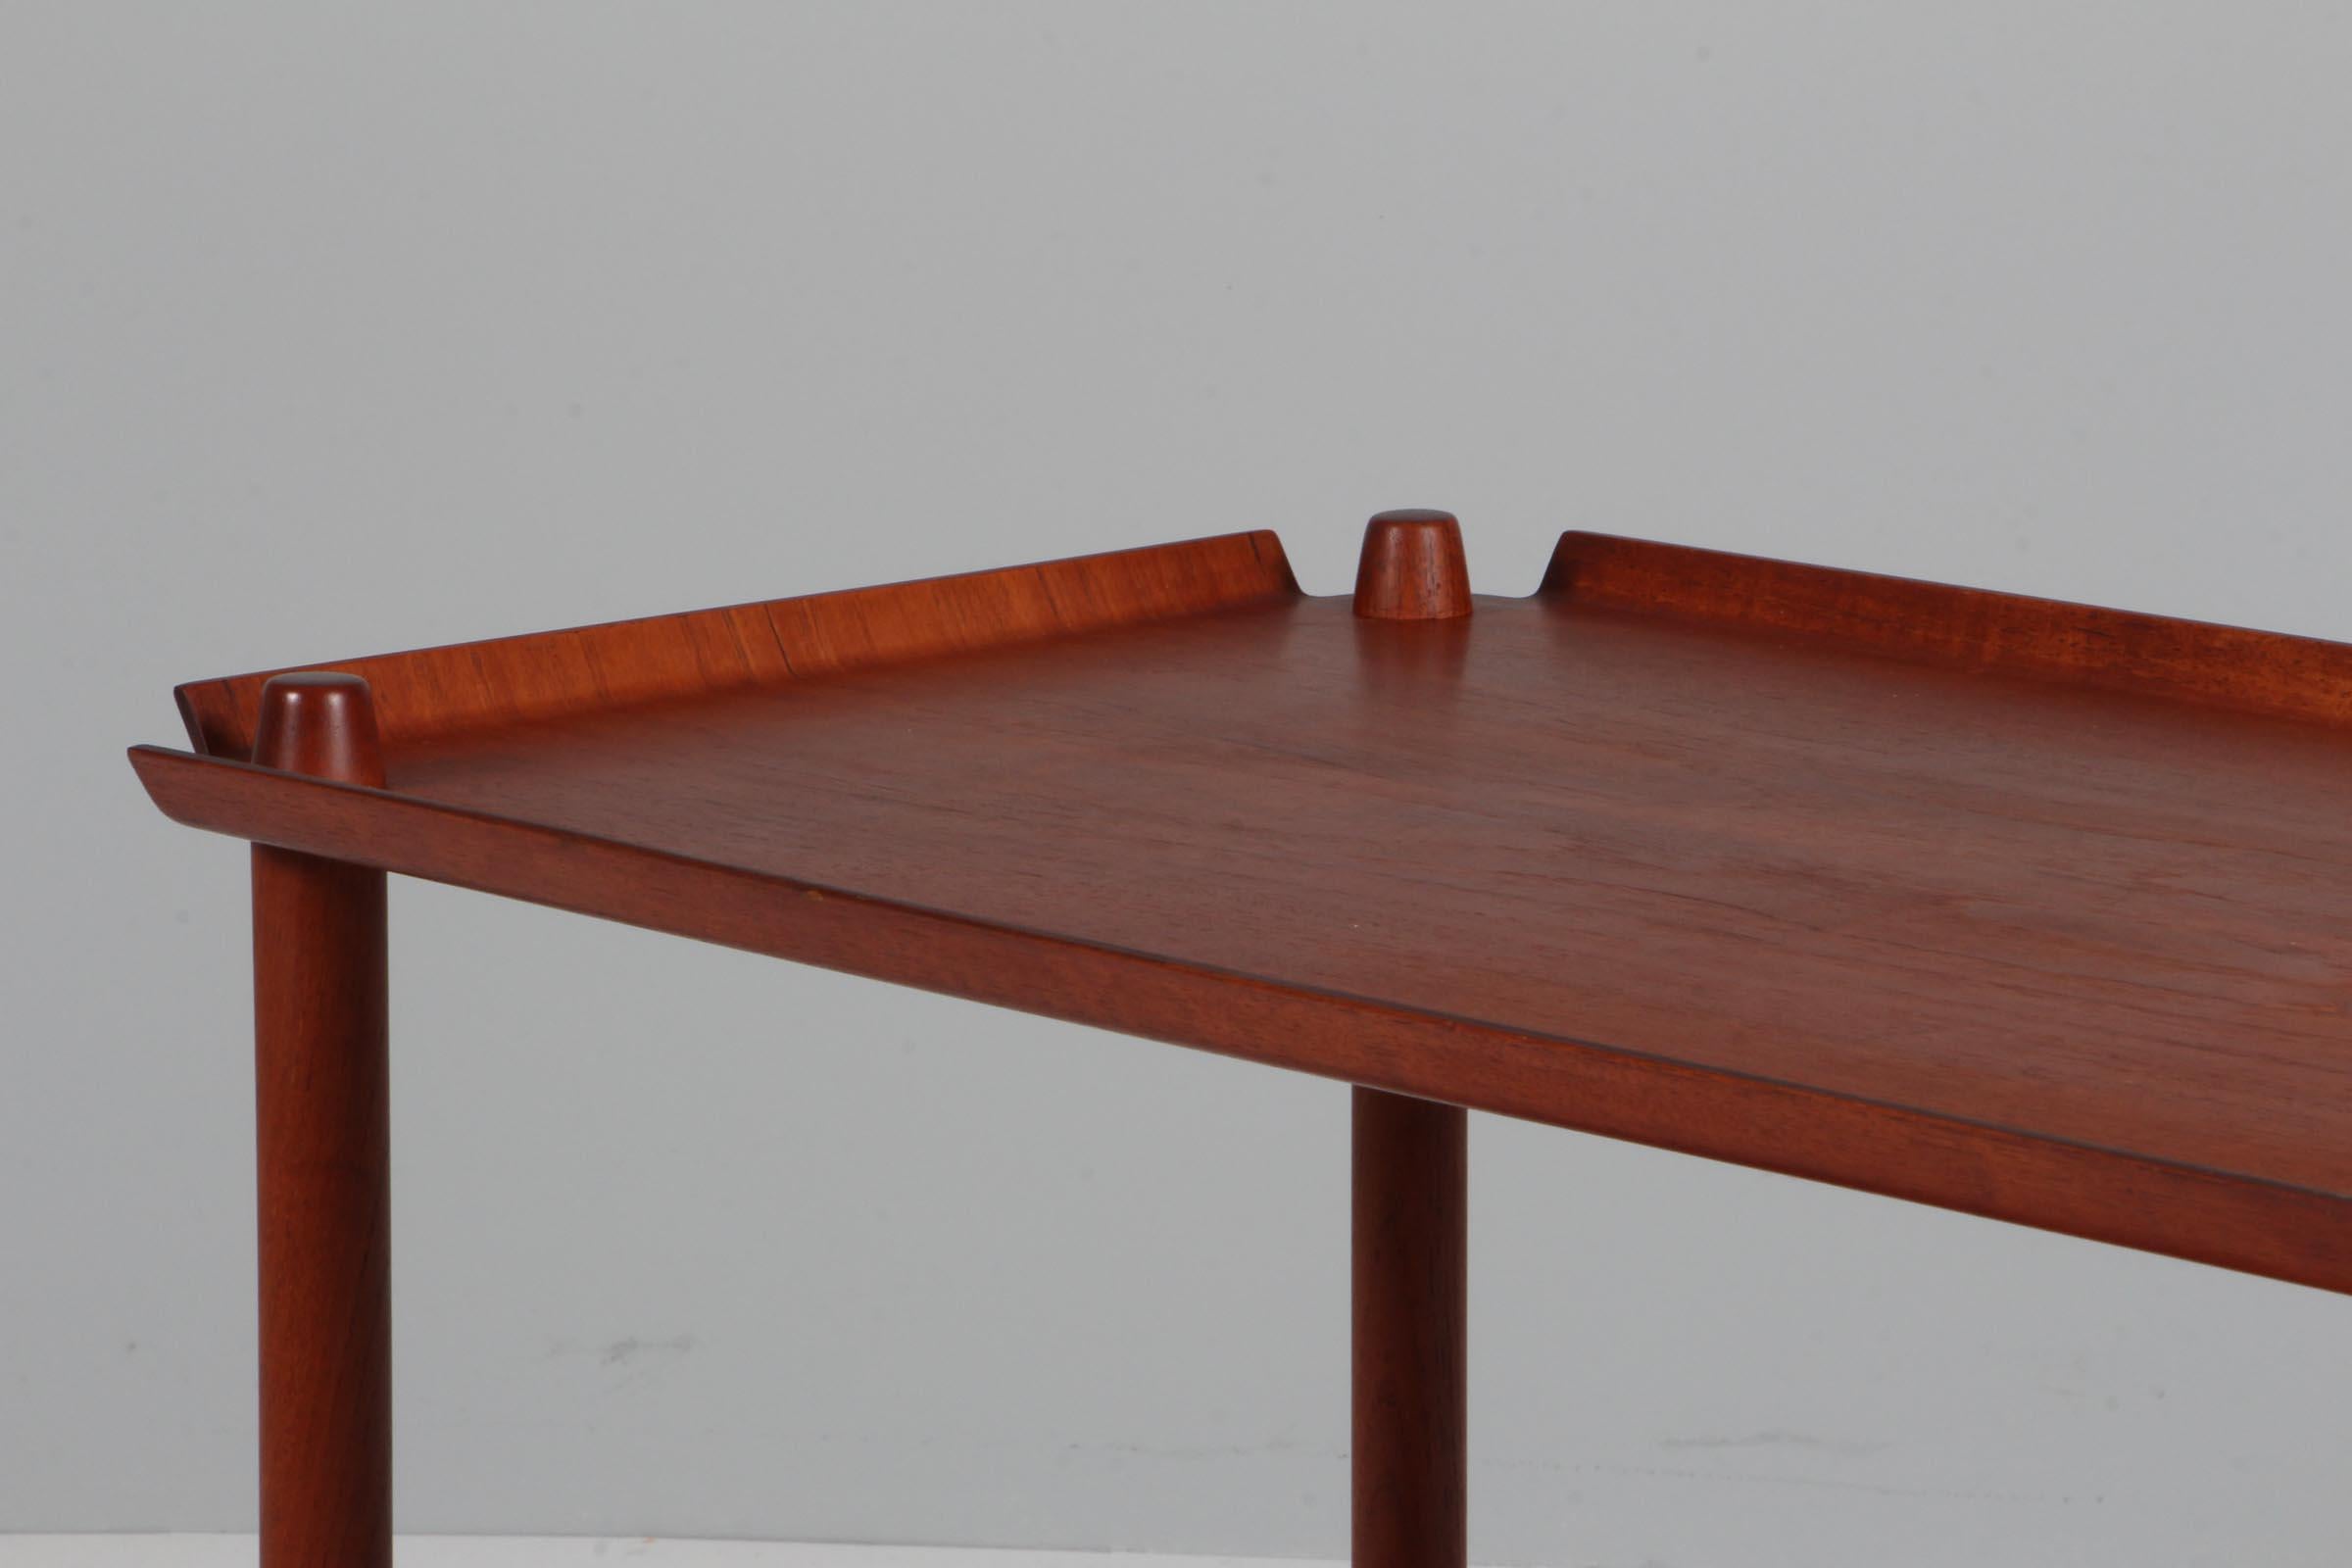 Mid-20th Century Poul Hundevad bar cart in partly solid teak, 1960's Denmark. For Sale